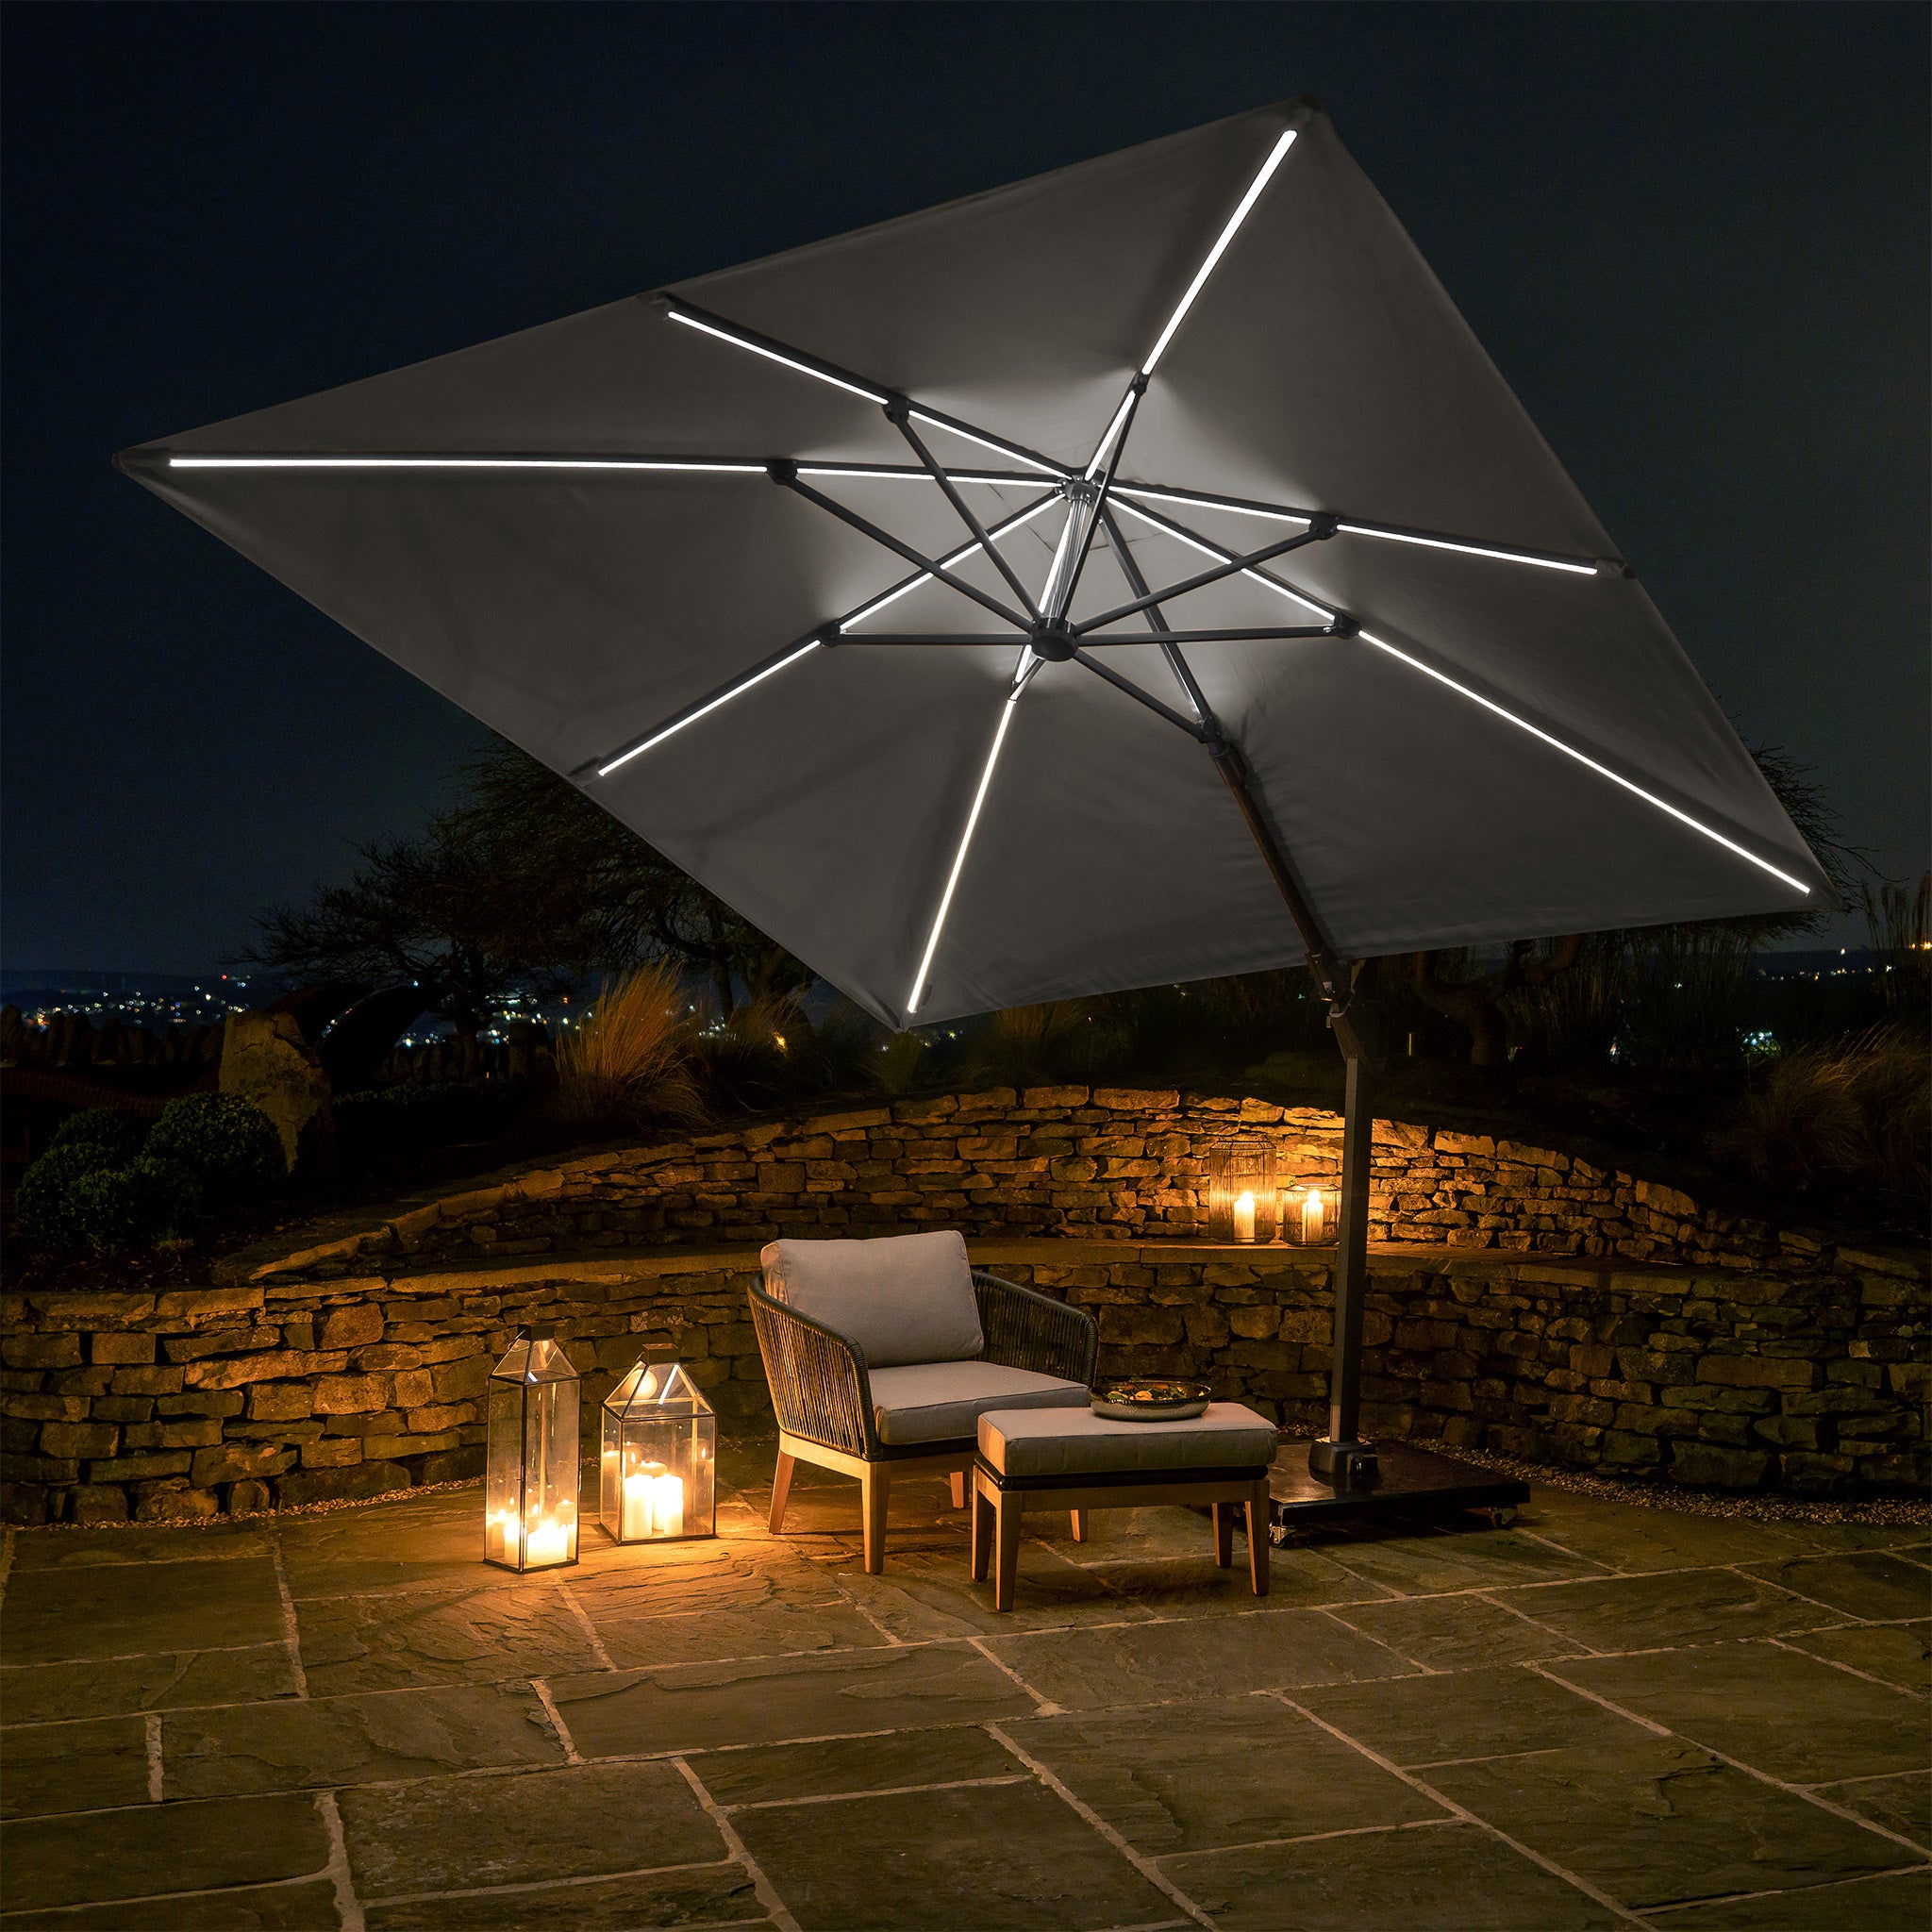 Glow Challenger T2 3m Square Cantilever Parasol in Grey